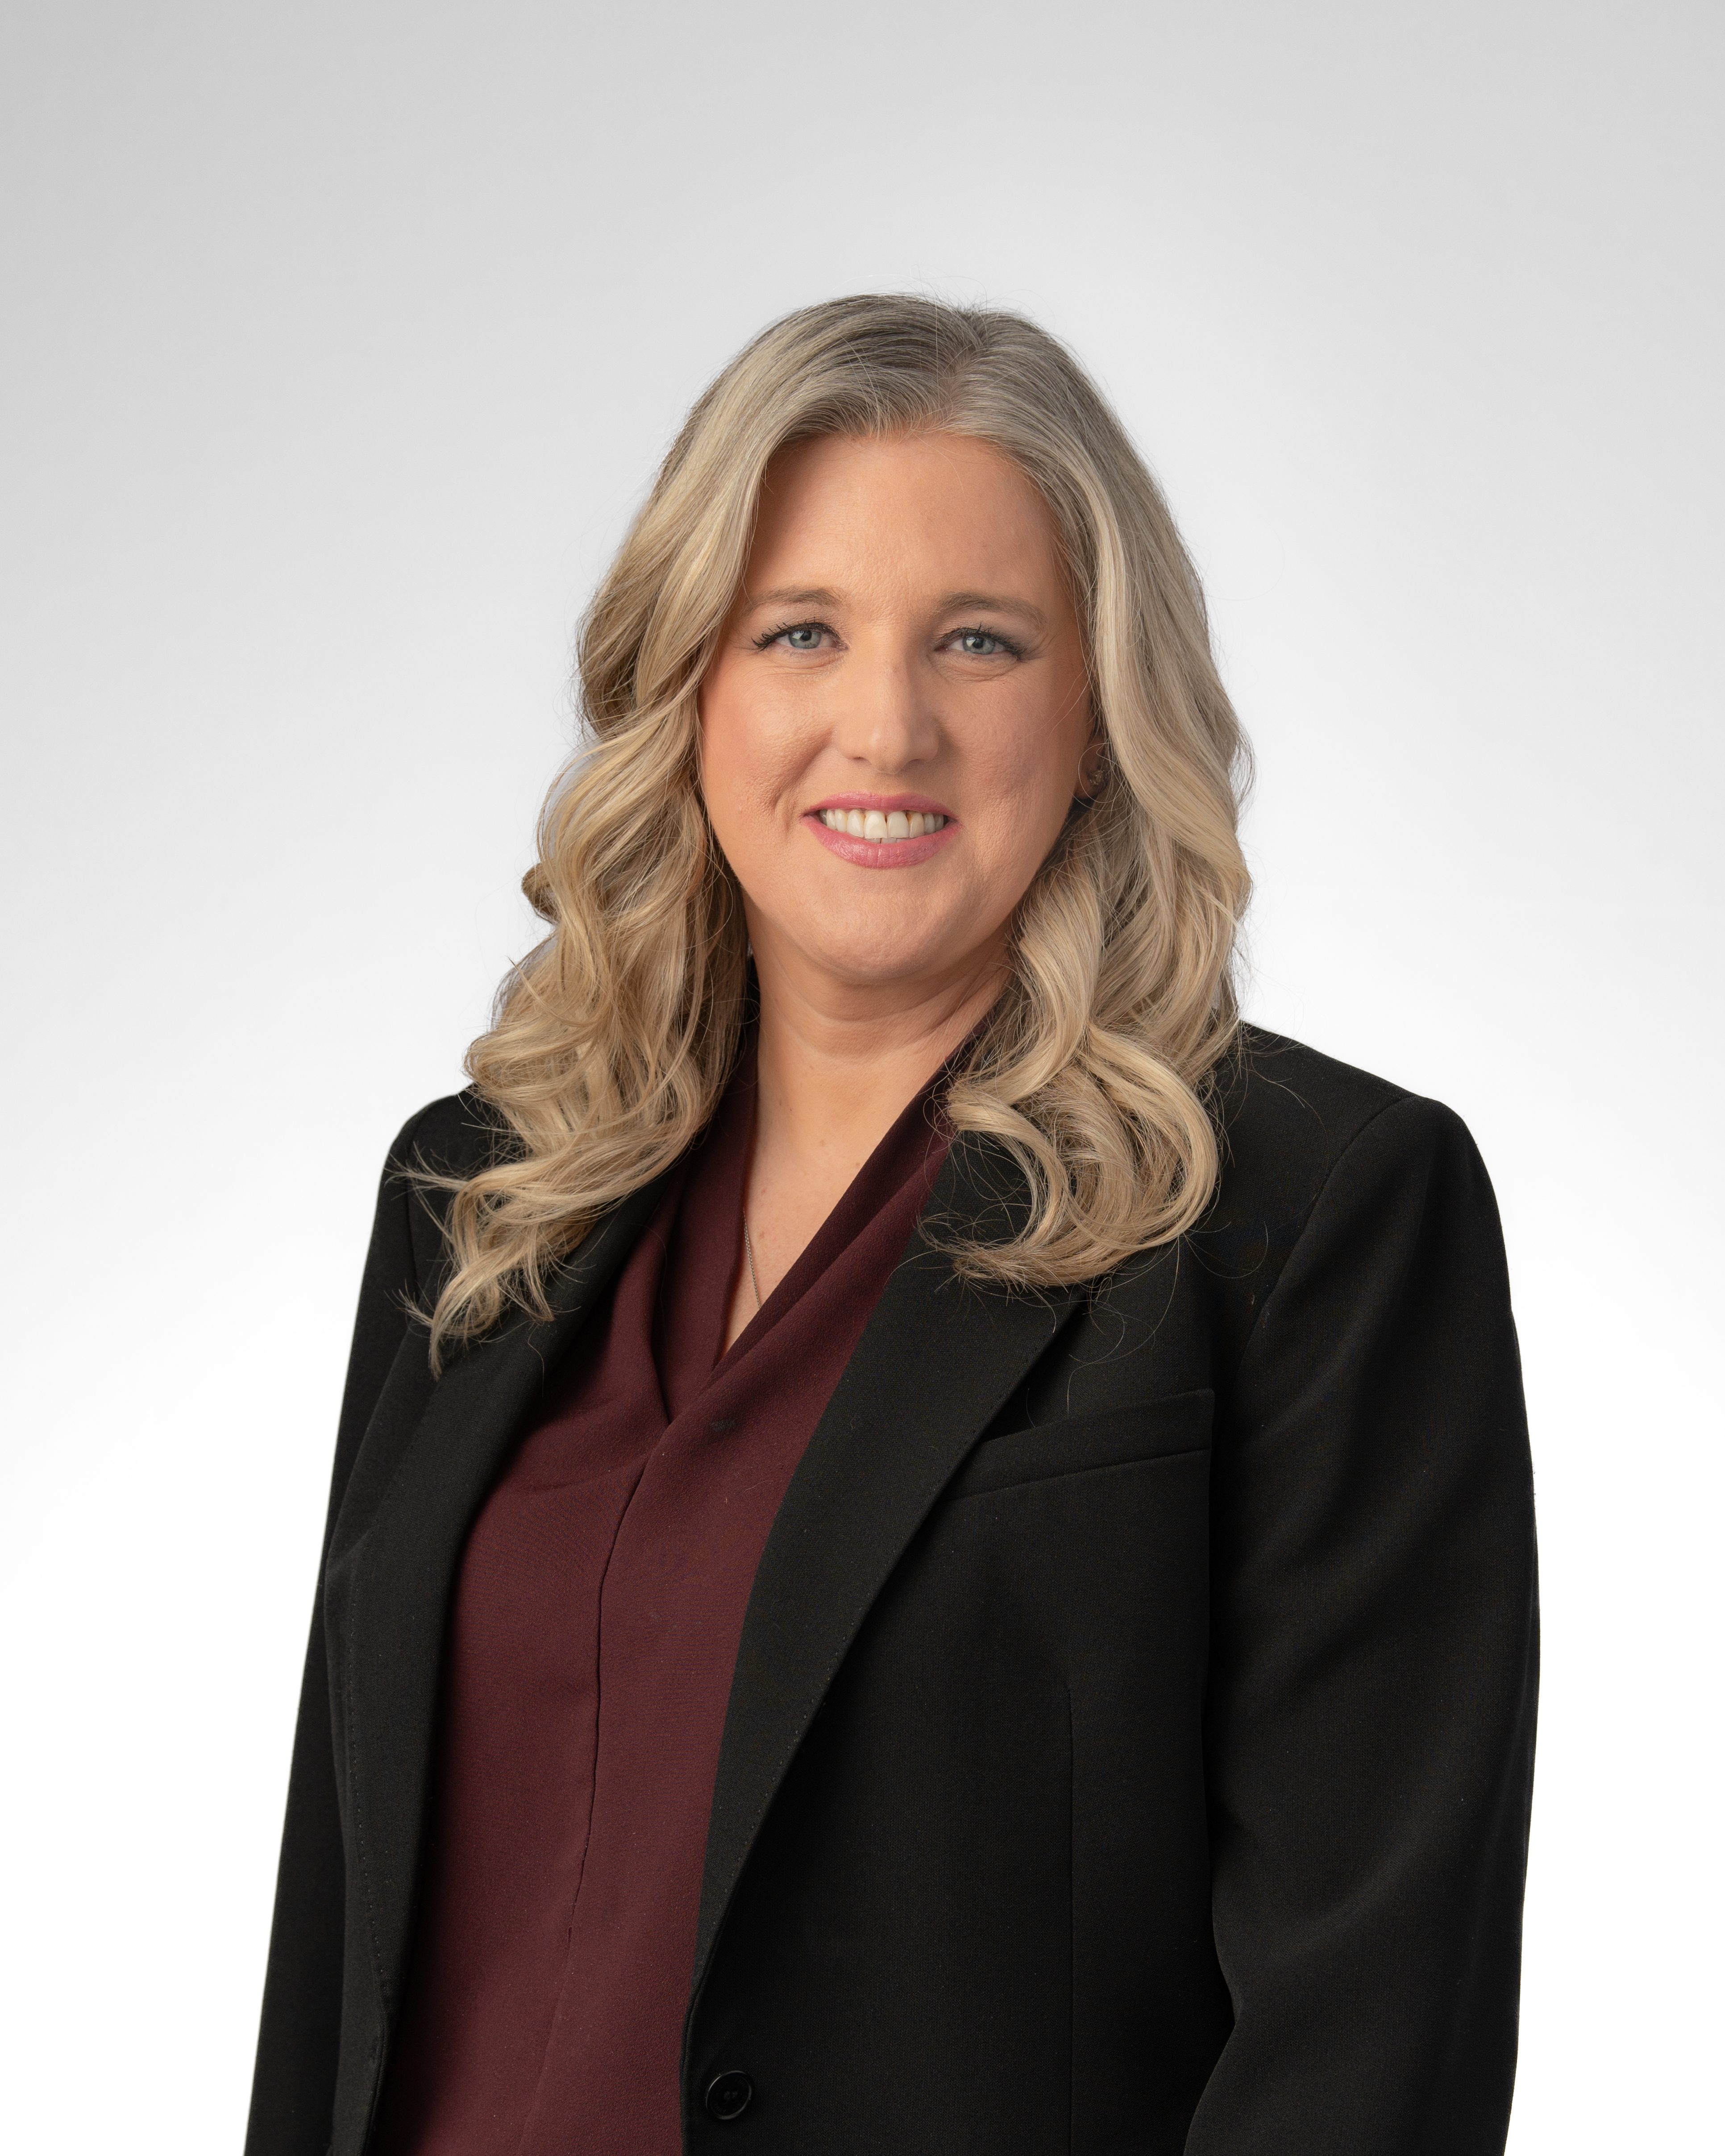 Daniele D. De Voe - concentrates her practice in the areas of litigation and appeals, labor and employment law, bankruptcy law, insolvency and creditor rights, corporate securities law, estate, trusts, and elder law.